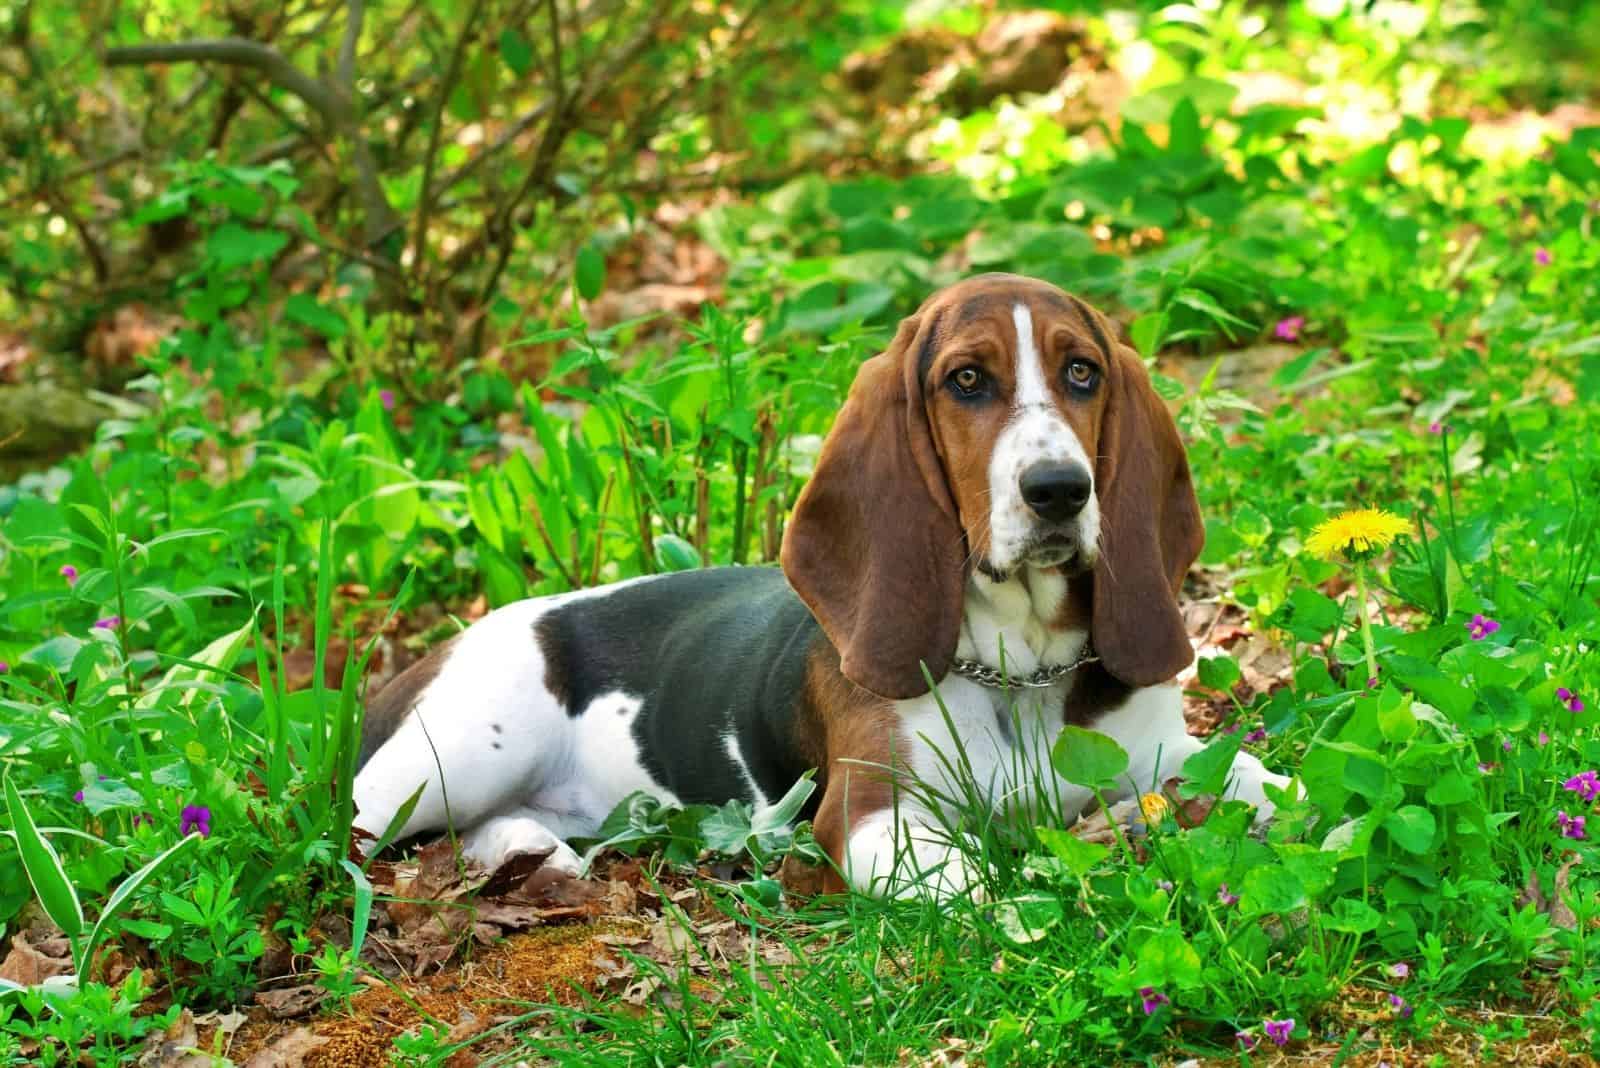 resting basset hound in the green lawn 